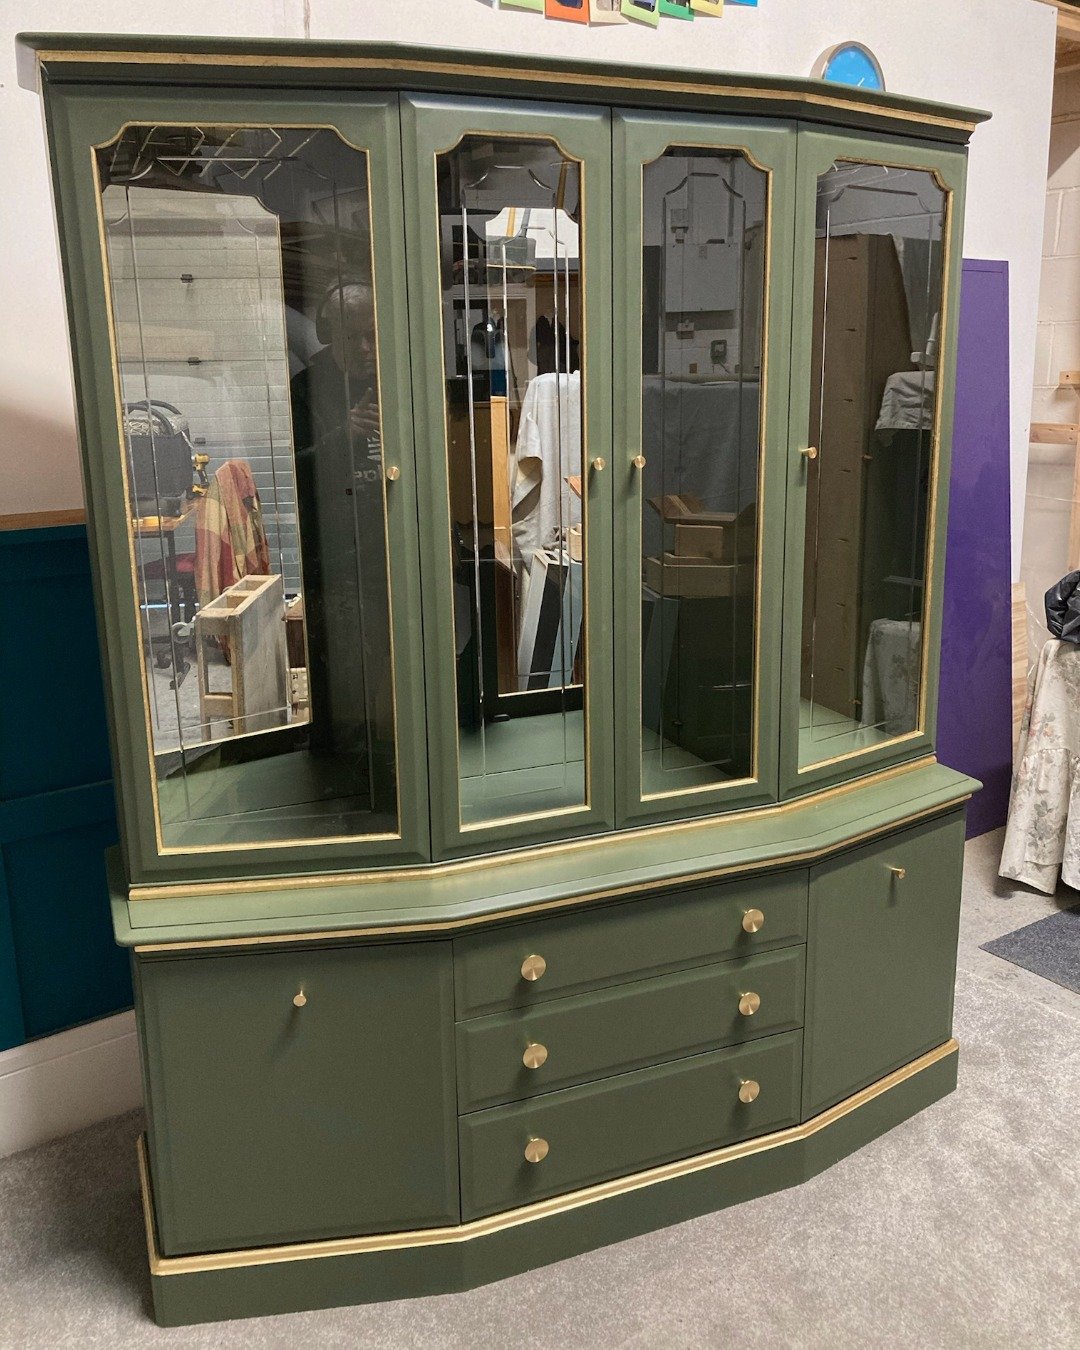 A statement #Stag sideboard upcycle in green and gold. Thank goodness it separated into two pieces, otherwise I would have needed a bigger van! 🚚

In its original finish this piece had loads of useful storage, but it was quite imposing. Now it's tra